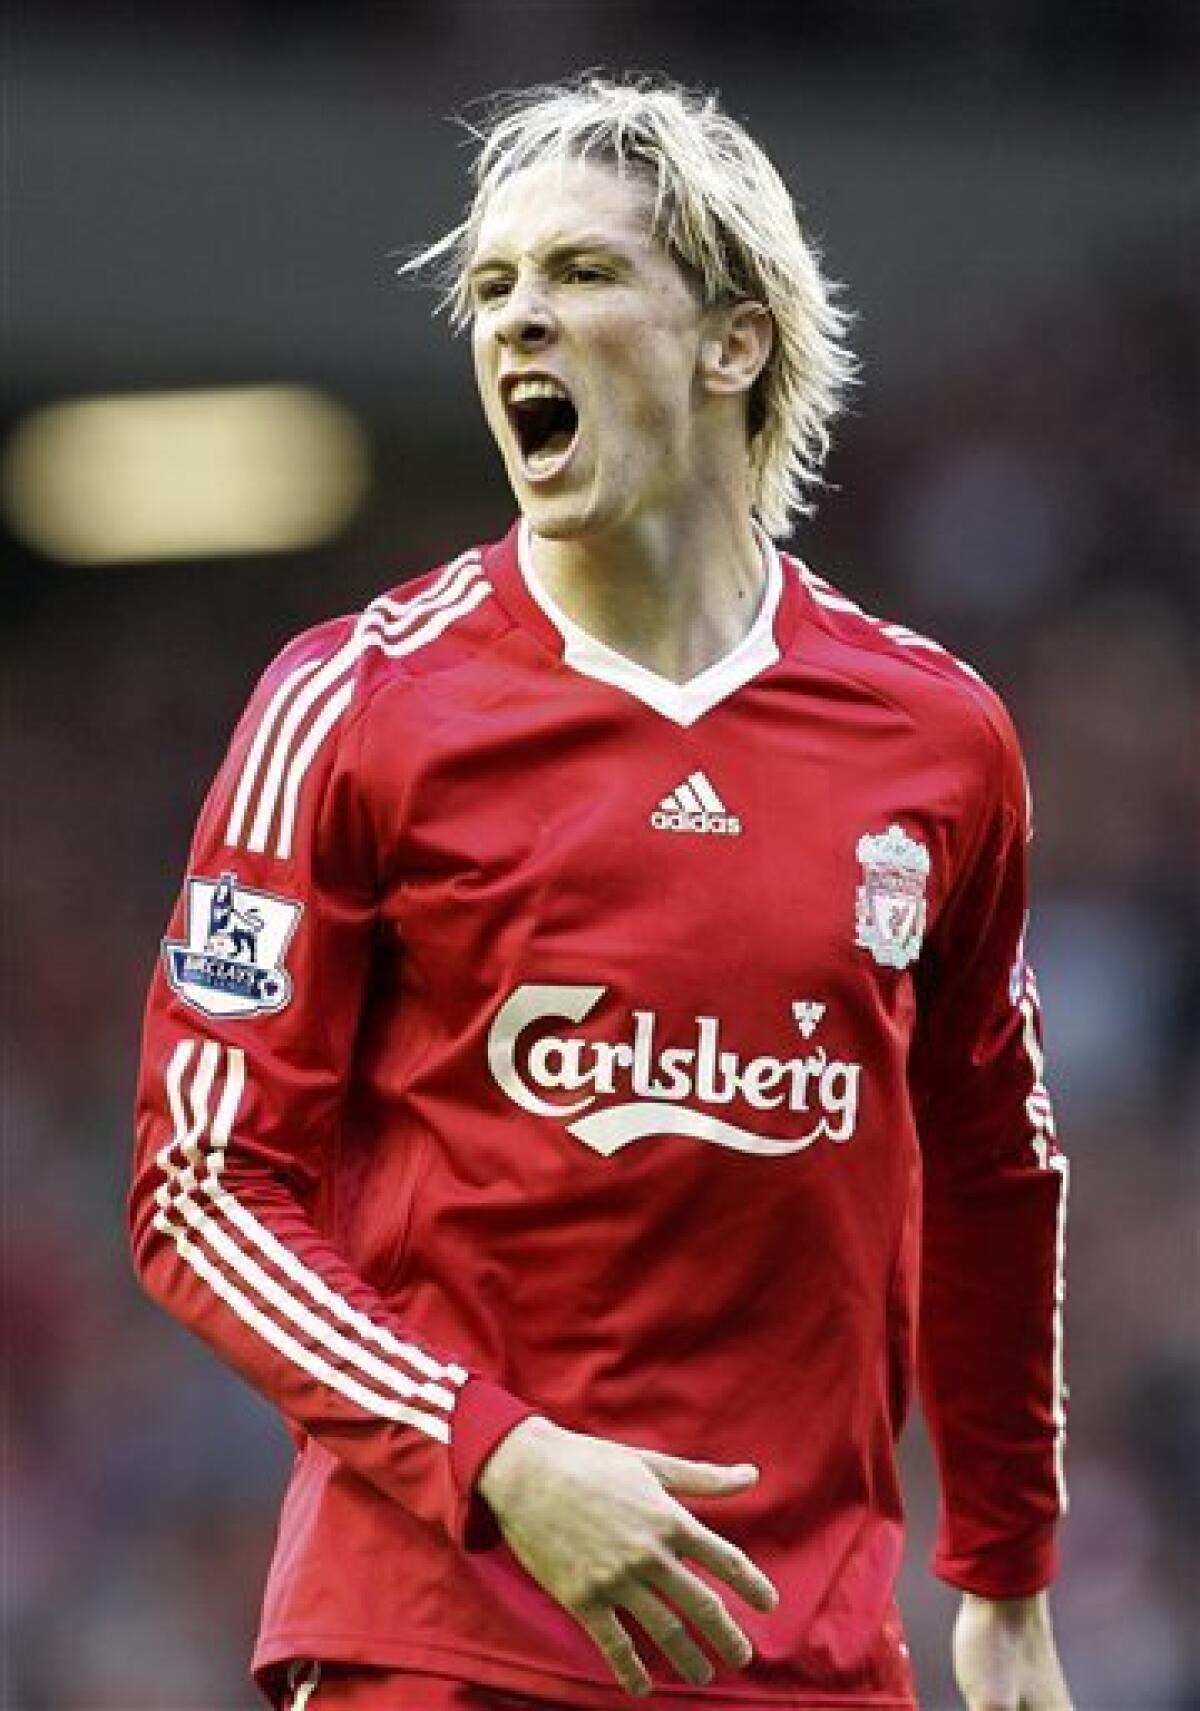 Liverpool's Fernando Torres reacts during their English Premier League soccer match against Manchester United at Anfield stadium, Liverpool, England, Sunday, Oct. 25, 2009. (AP Photo/Tim Hales)